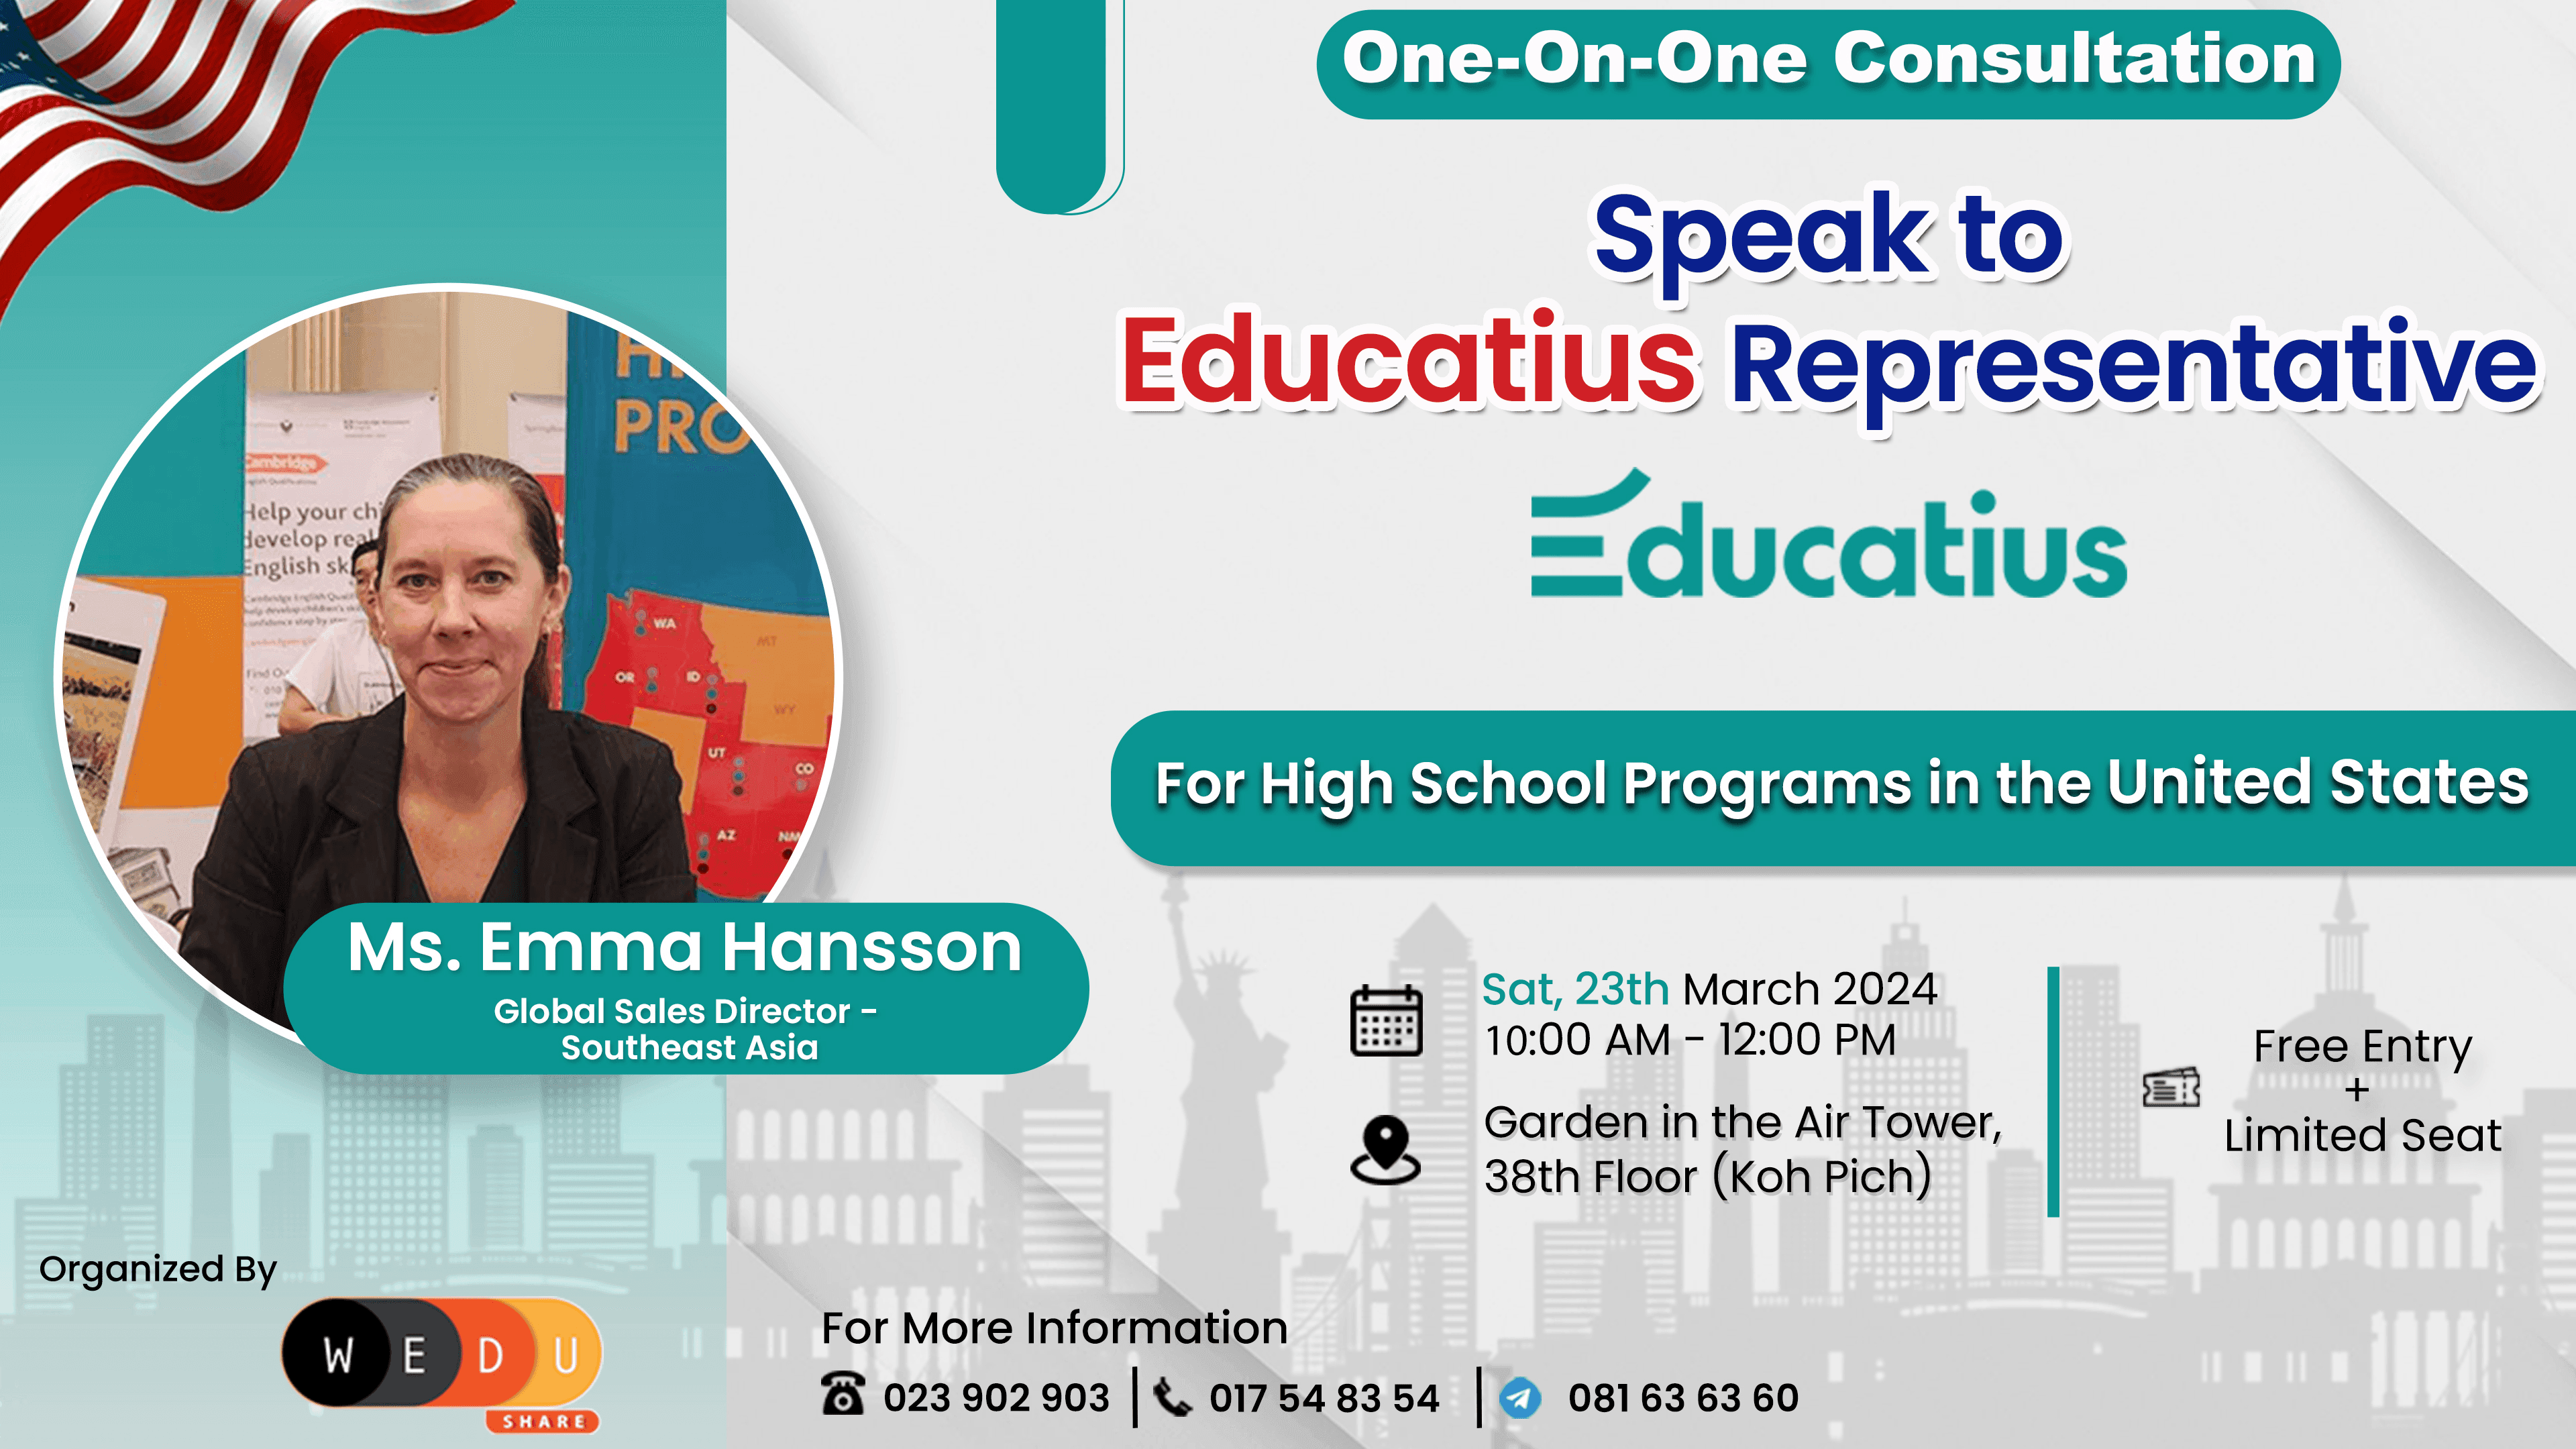 [One-On-One Consultation] Educatius Representative for High School Programs in the United States